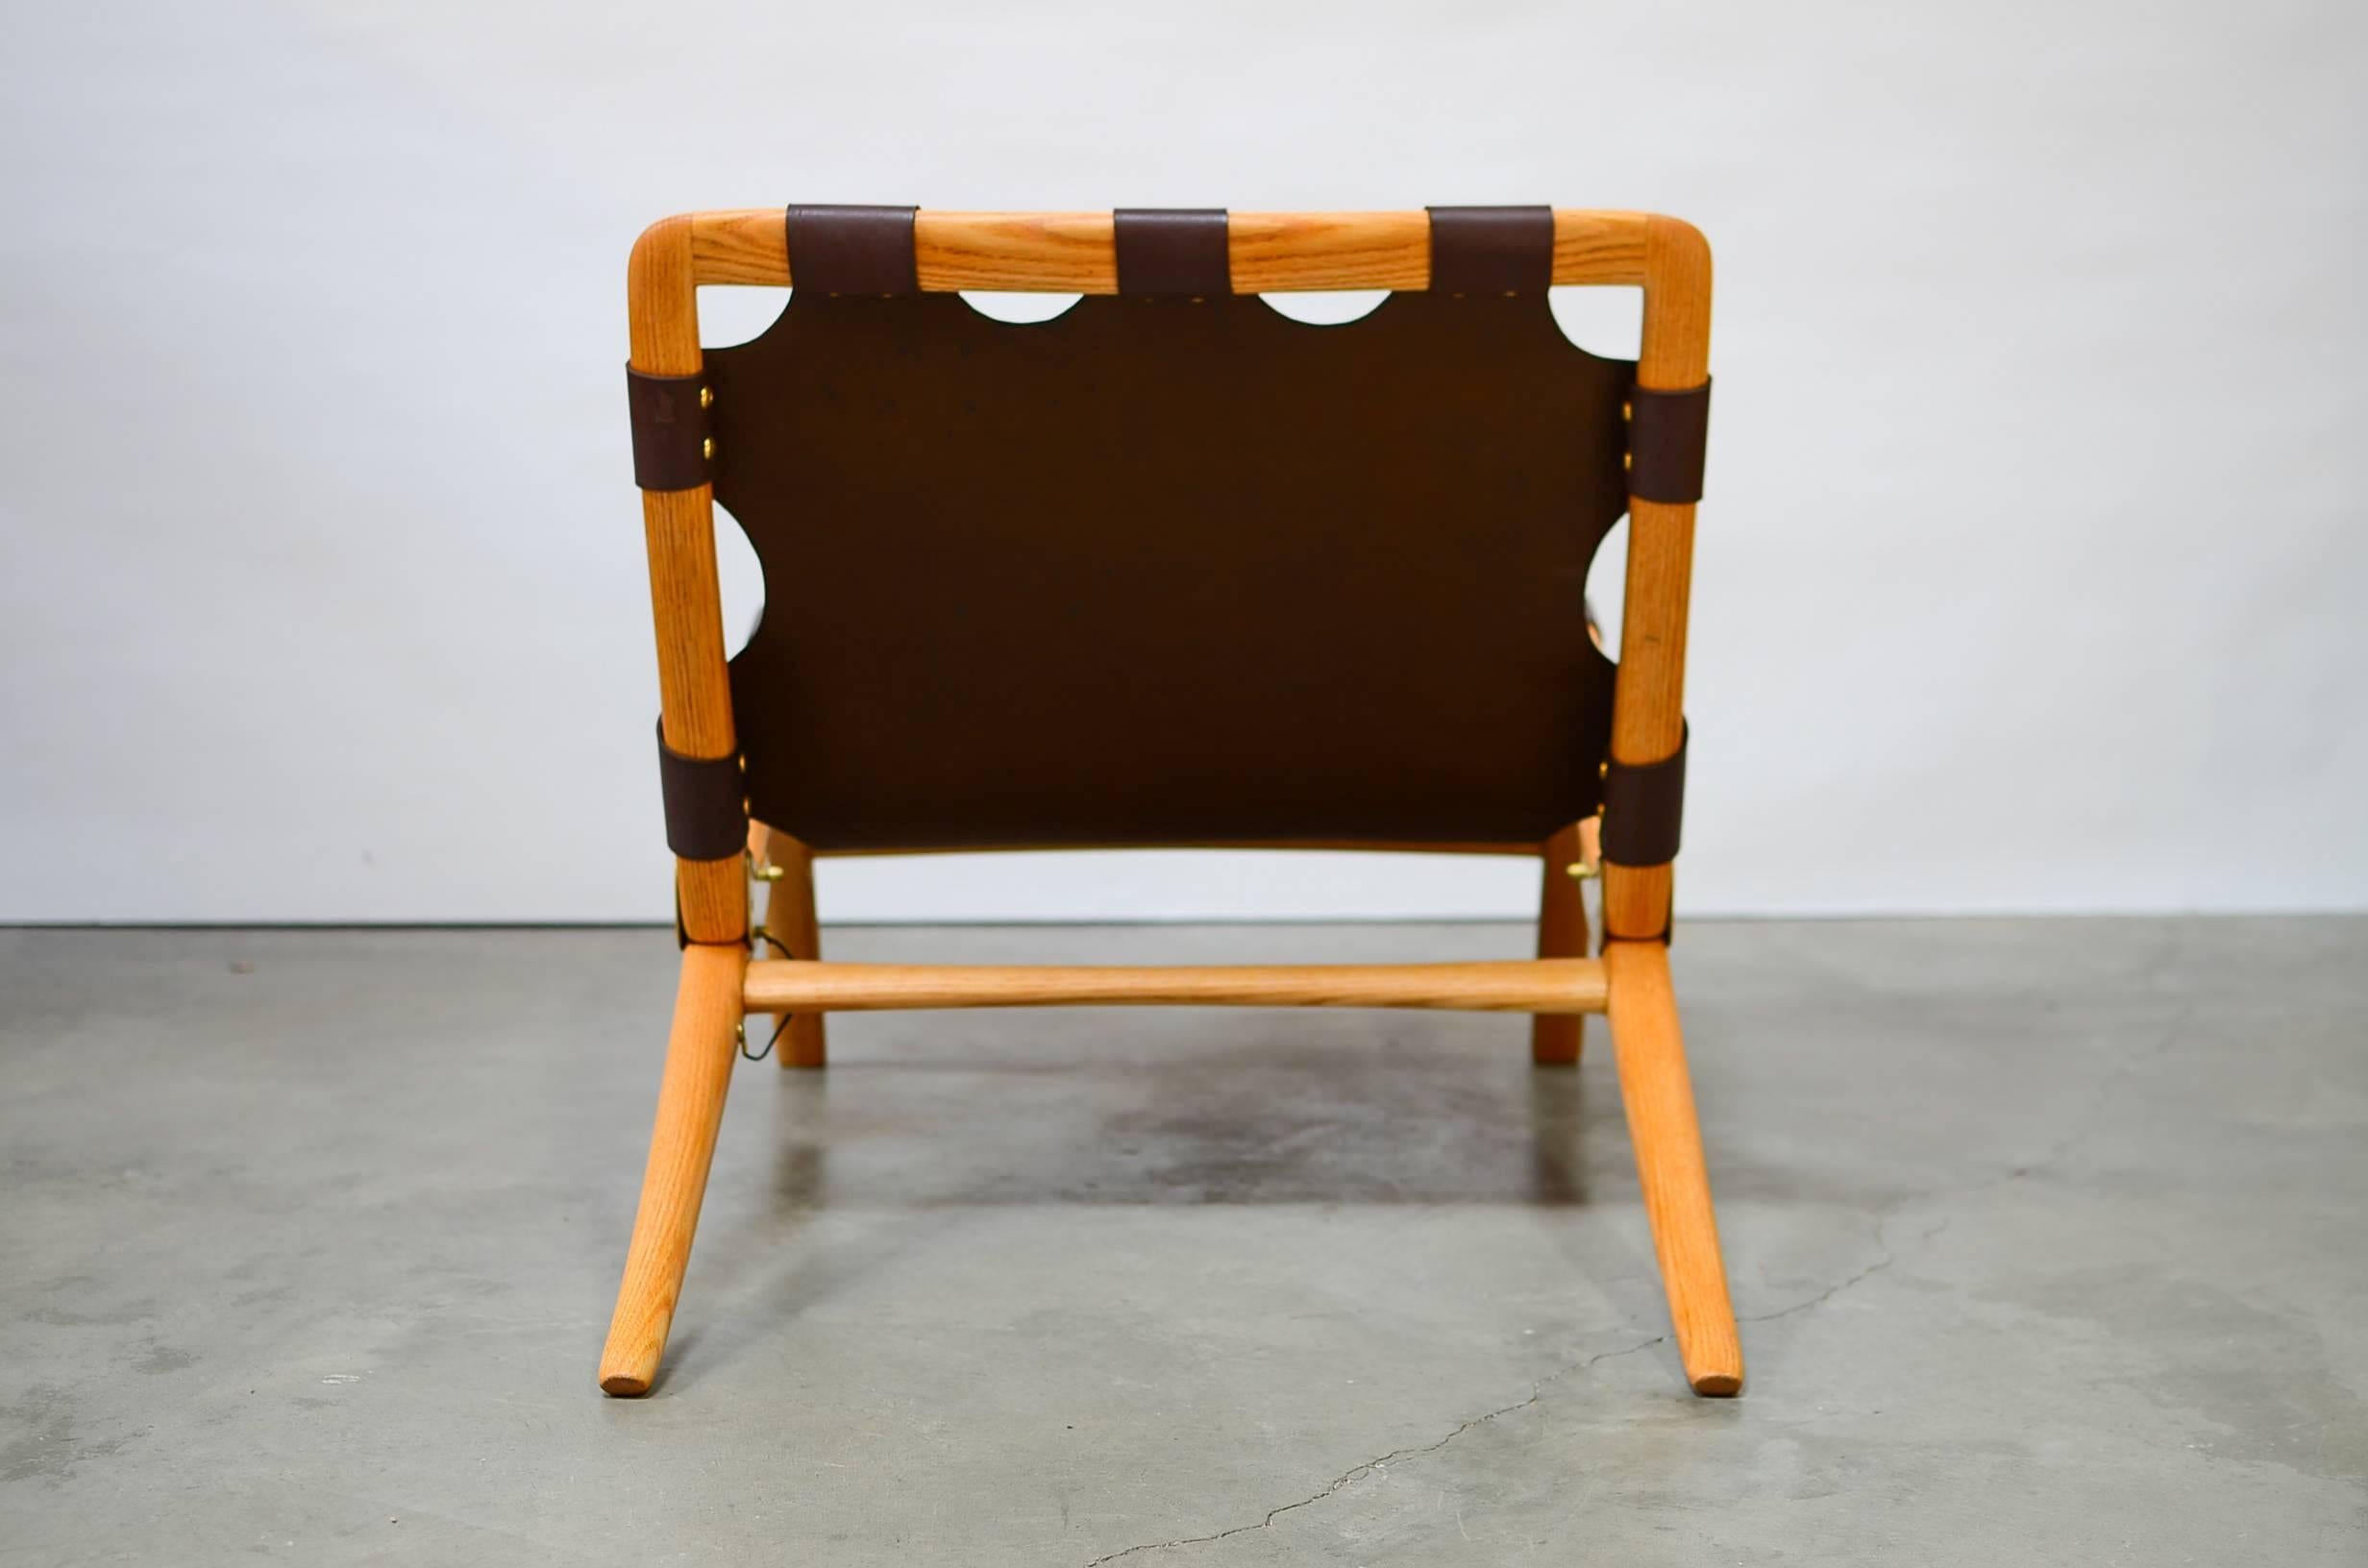 Mid-20th Century Eastern Red Oak and Leather Sling Lounge Chair by Dean Santner, 1971 For Sale